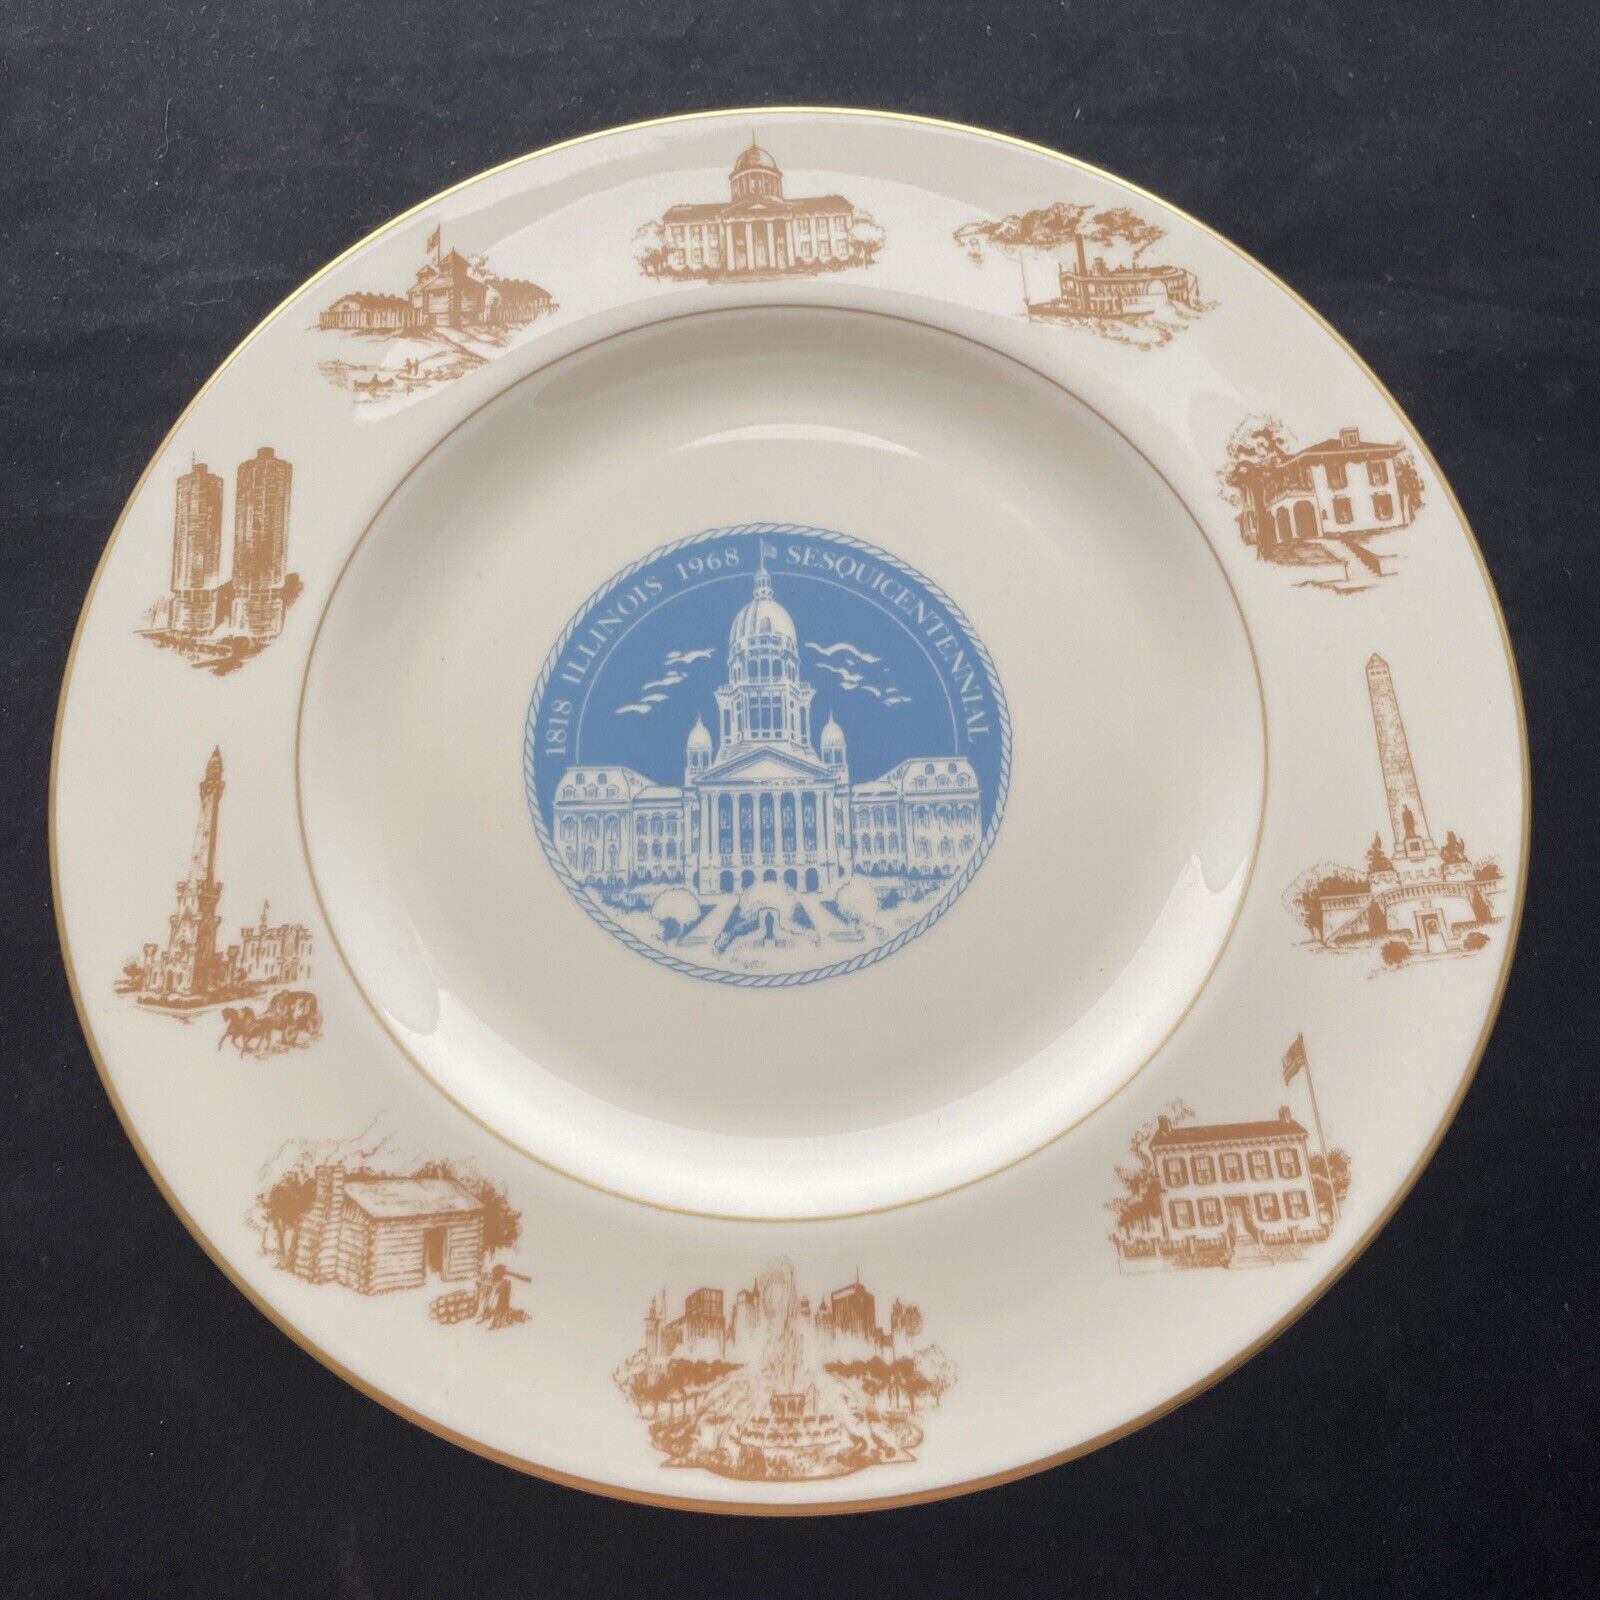 1968 Illinois Sesquicentennial Celebration Plate made for Marshall Field & Co.